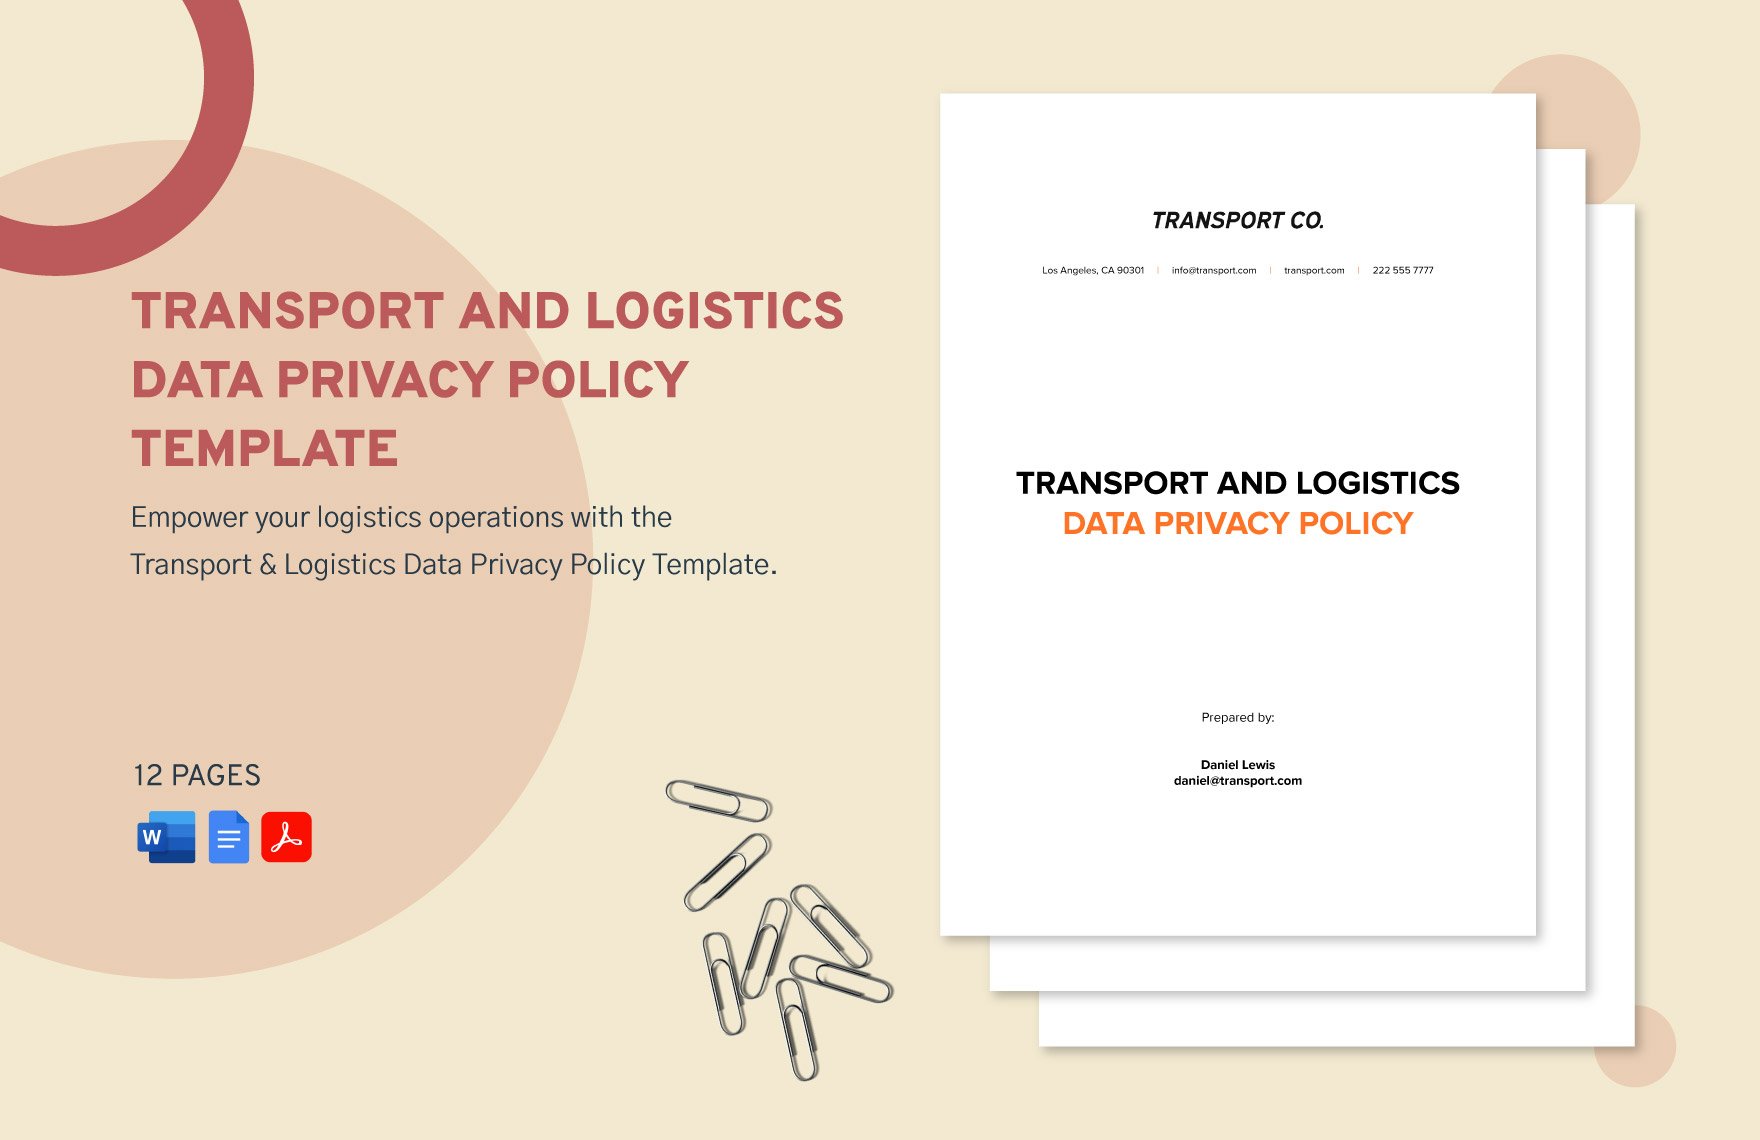 Transport and Logistics Data Privacy Policy Template